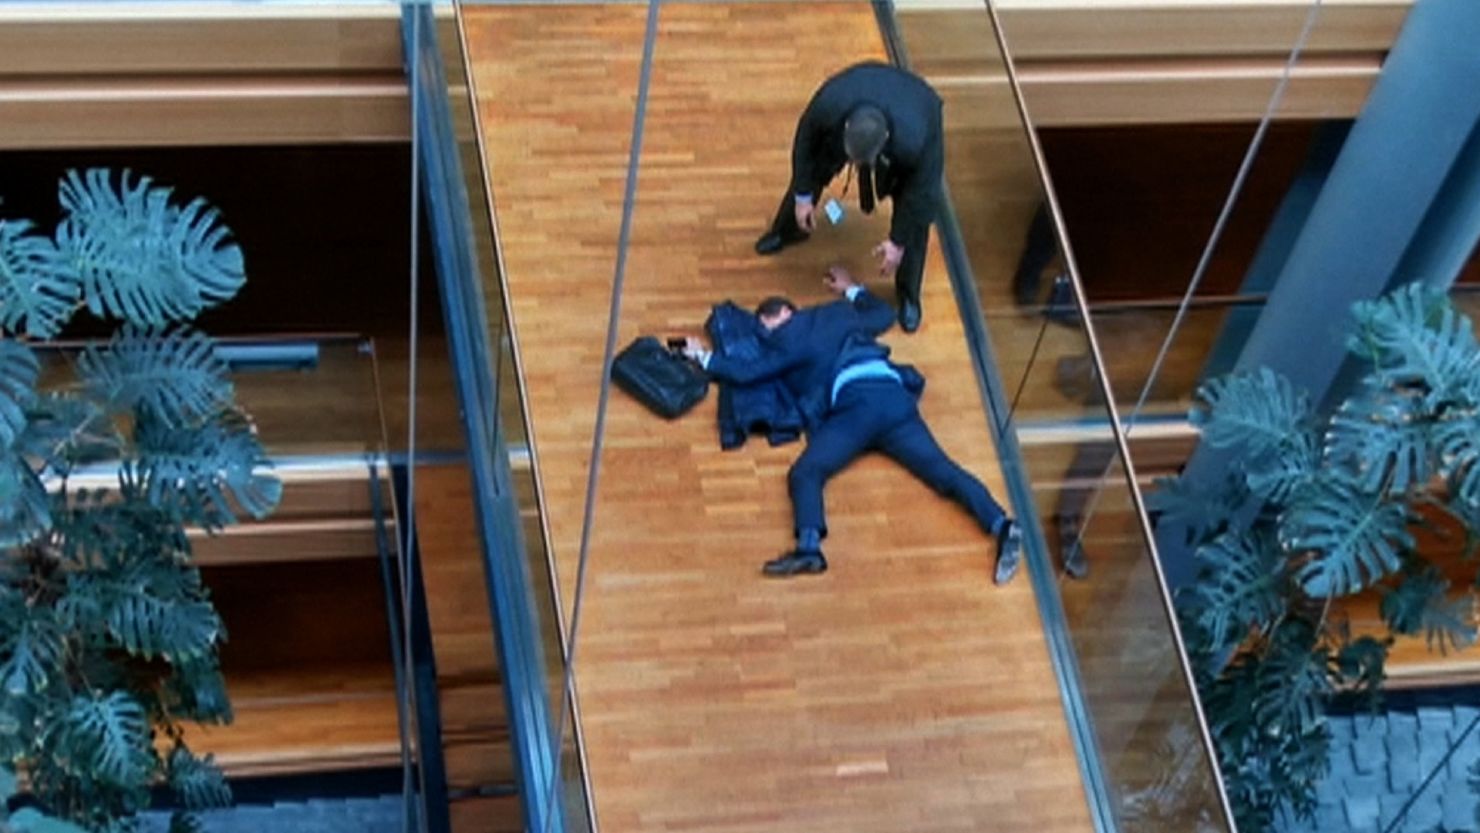 UKIP MEP Steven Woolfe is shown collapsed in the European Parliament after an "altercation."